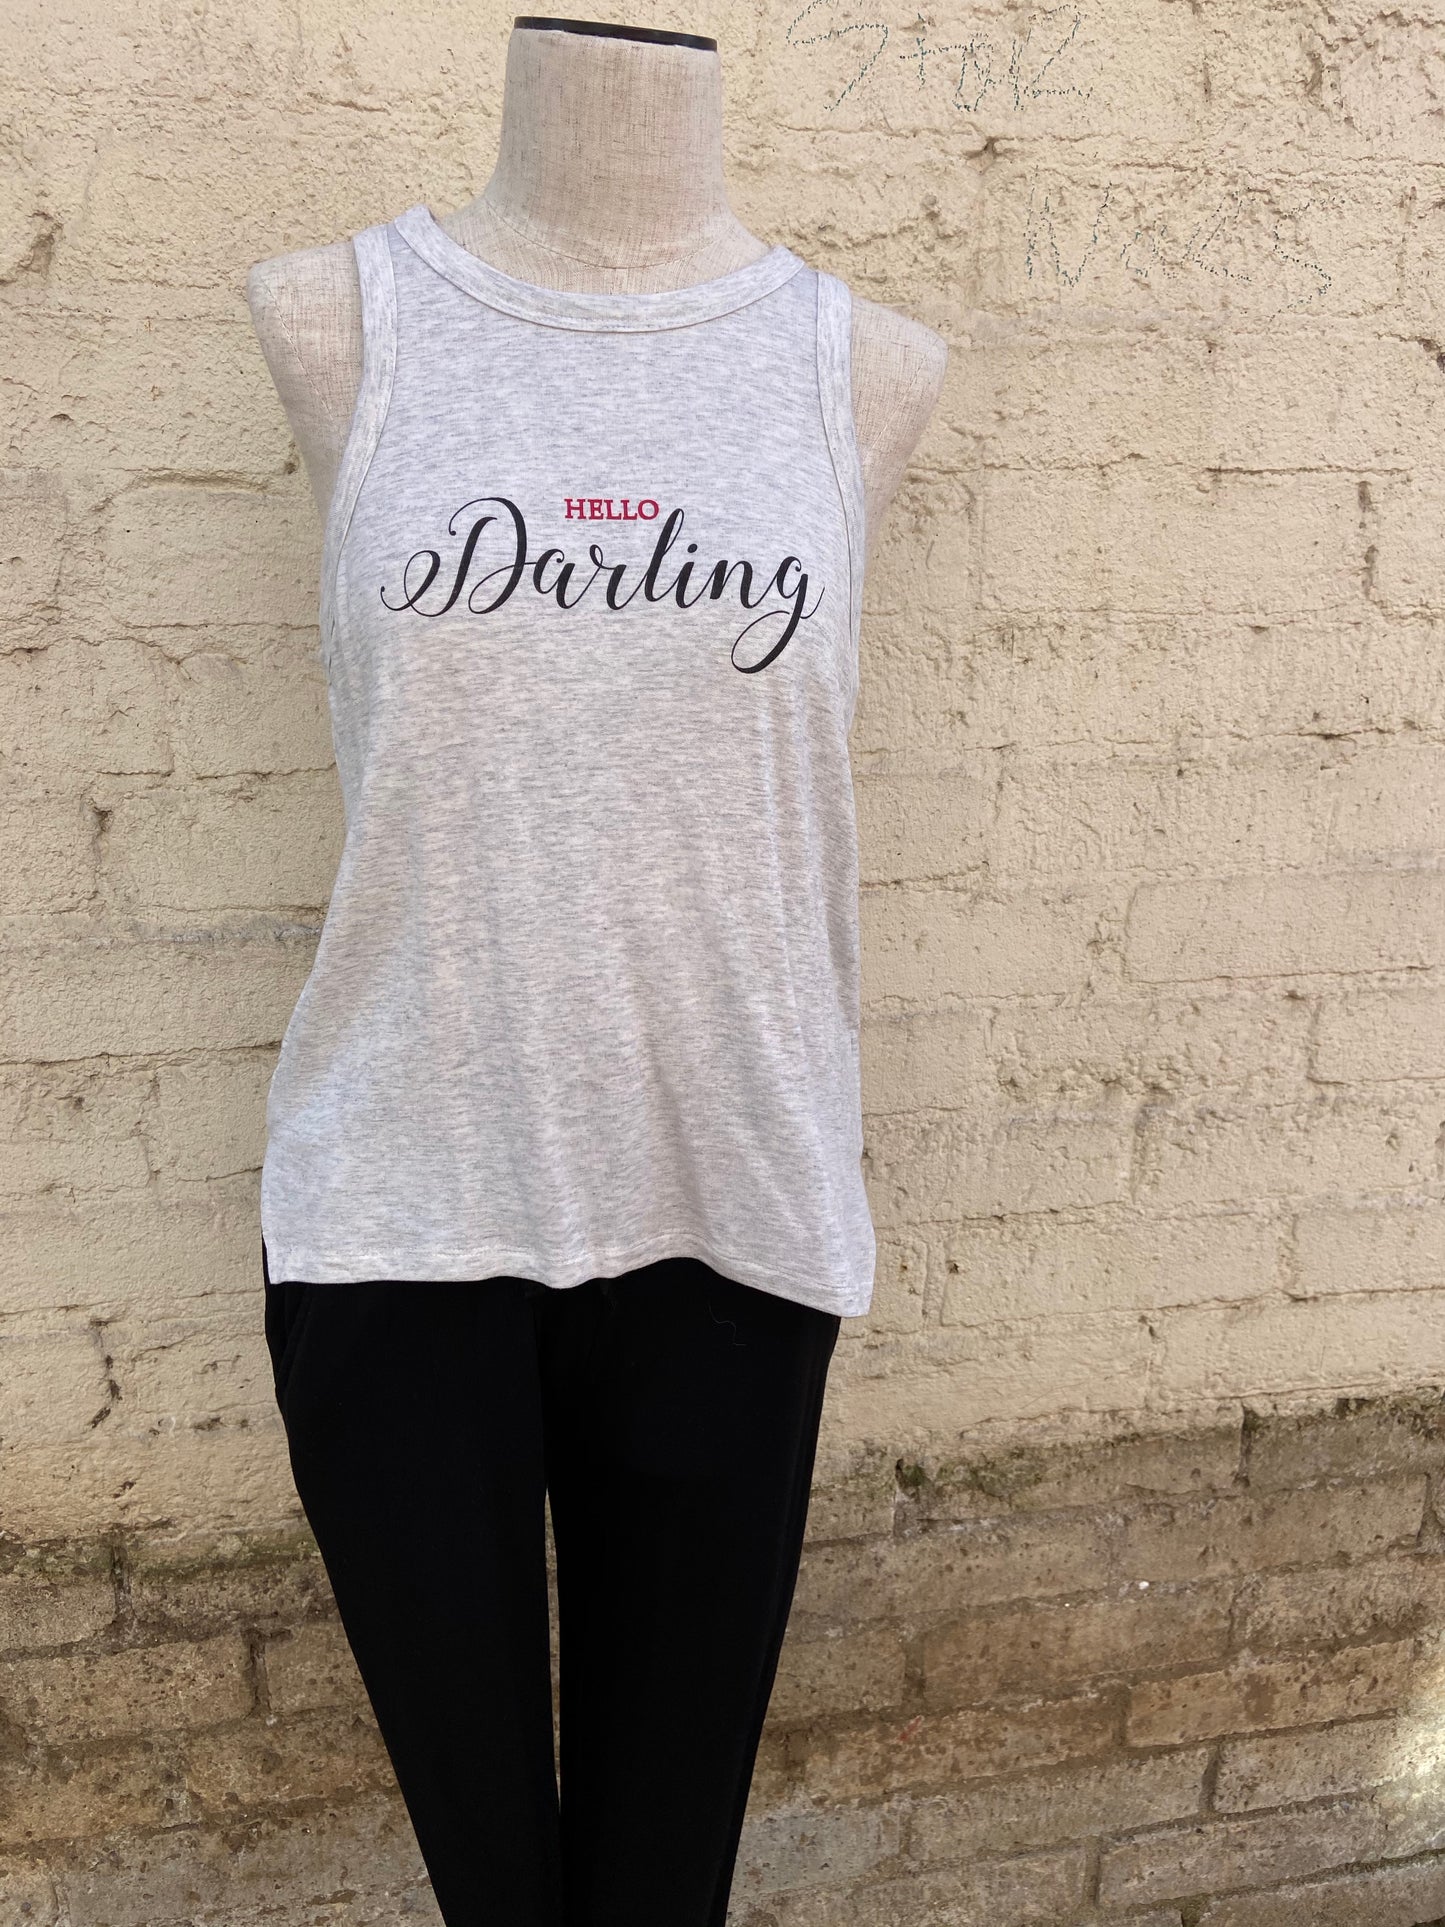 Relaxed black leggings with pockets, paired with a pebble grey tank that reads "Hello Darling" in red and black letters.